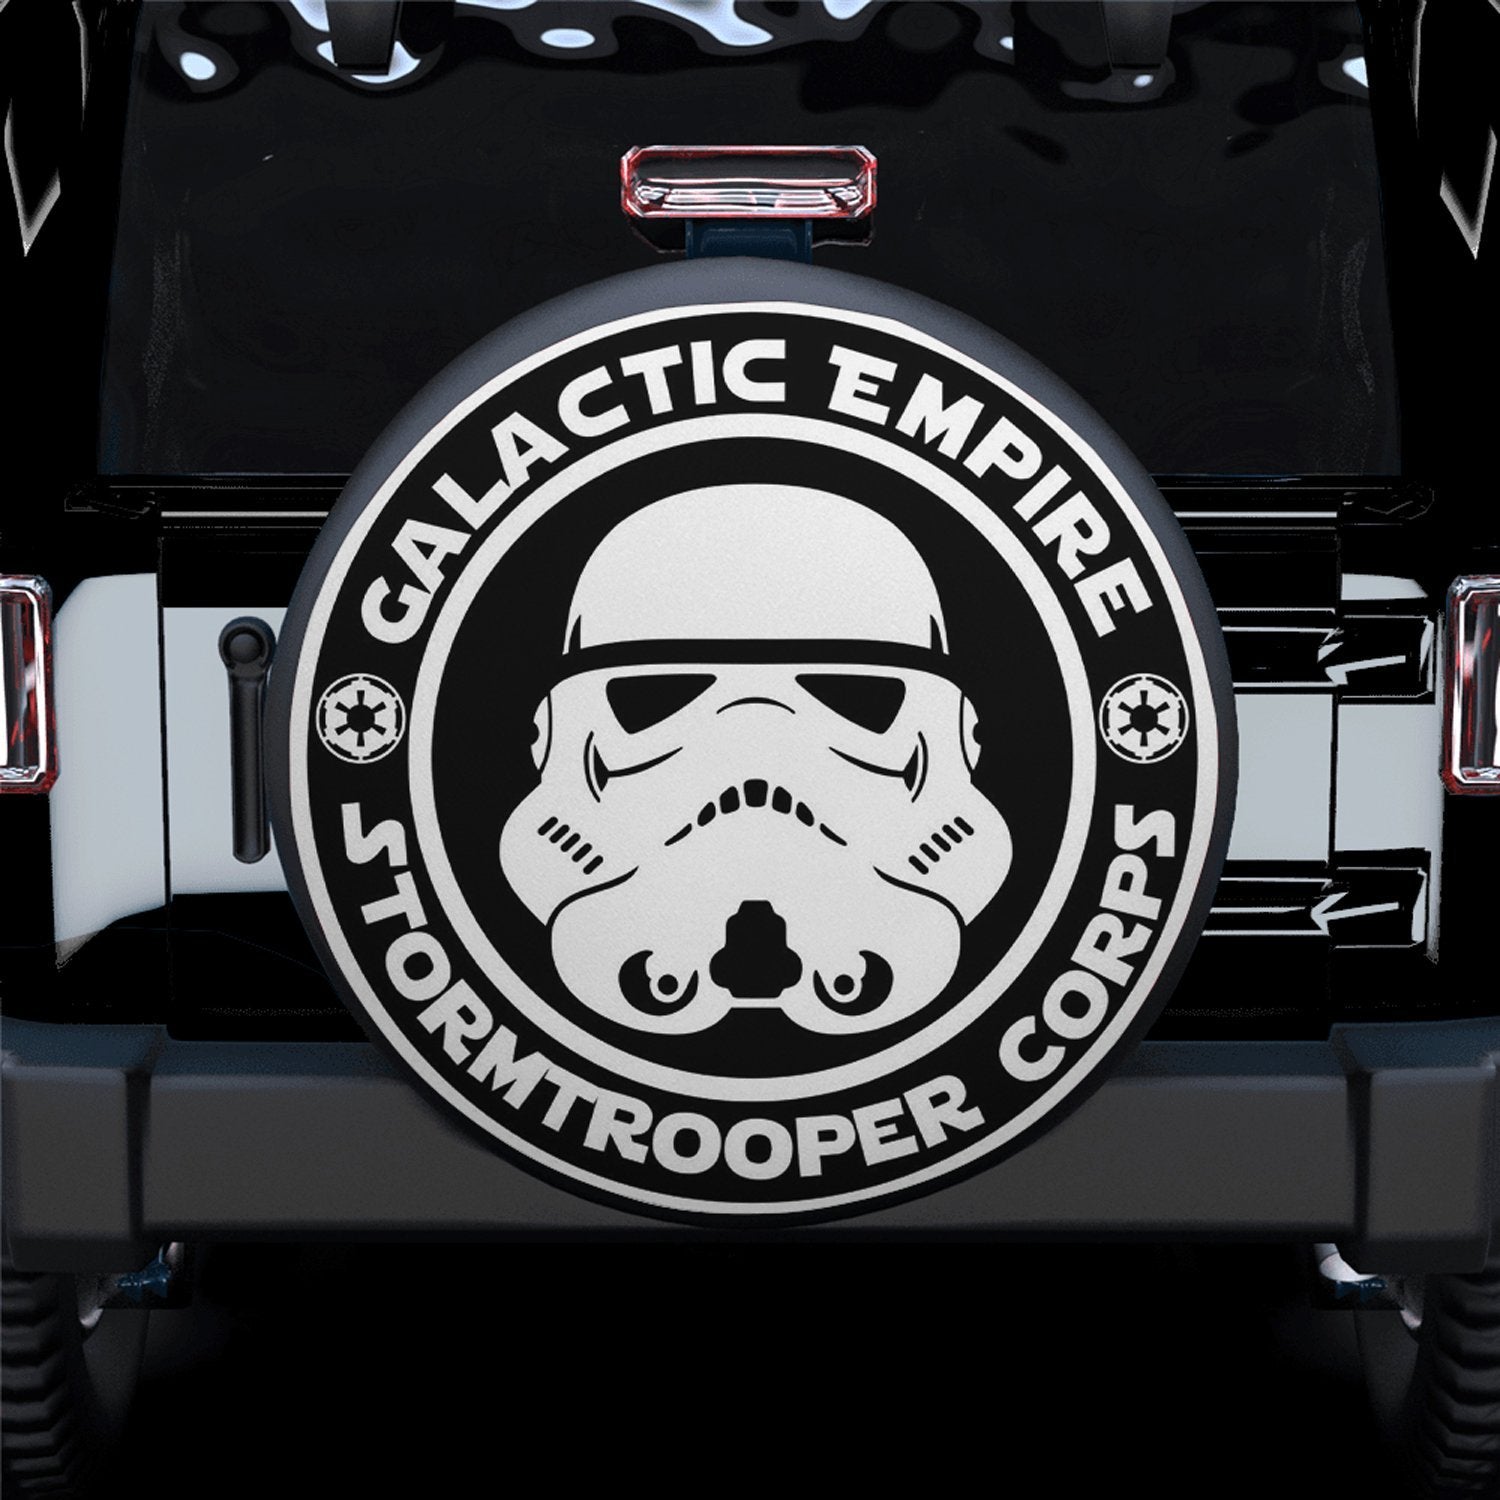 Empire Stormtrooper Spare Tire Covers Gift For Campers